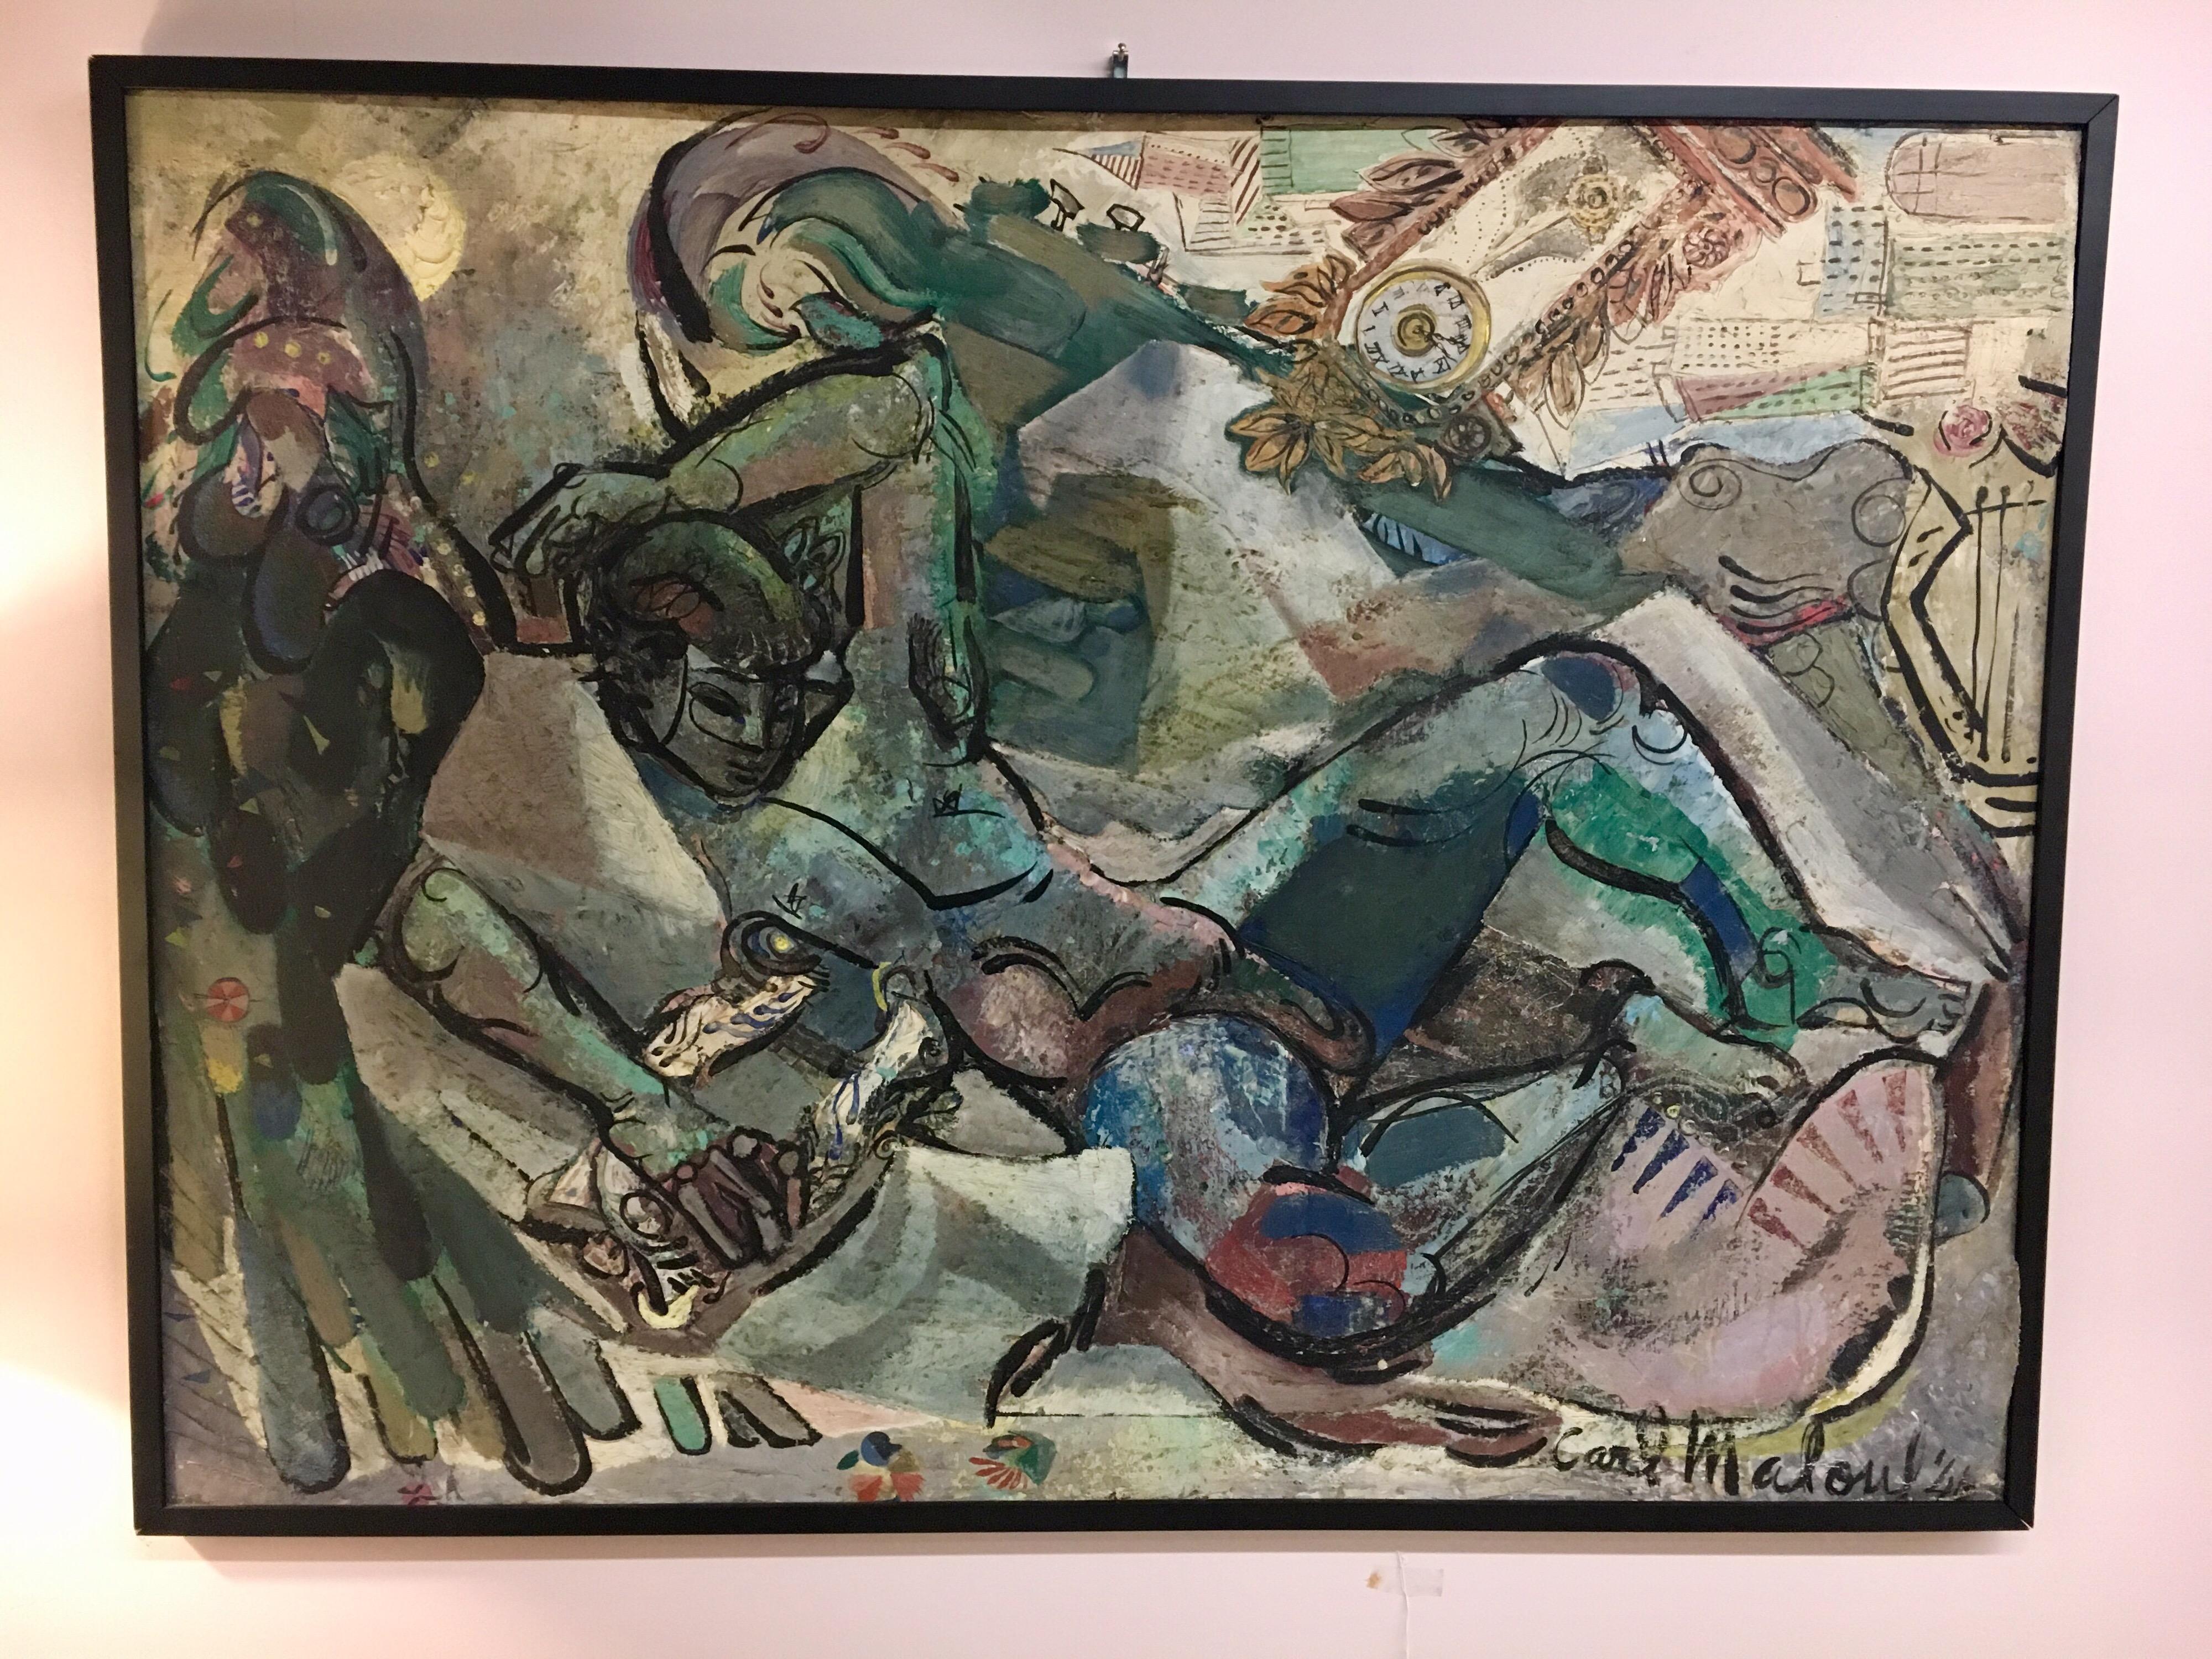 Early midcentury Carl Malouf original oil on canvas painting. Signed by the artist in the bottom right.
Malouf was a well known painter of abstract New York scenes and was also known to be a dear friend of
the novelist Glenway Wescott. He did most